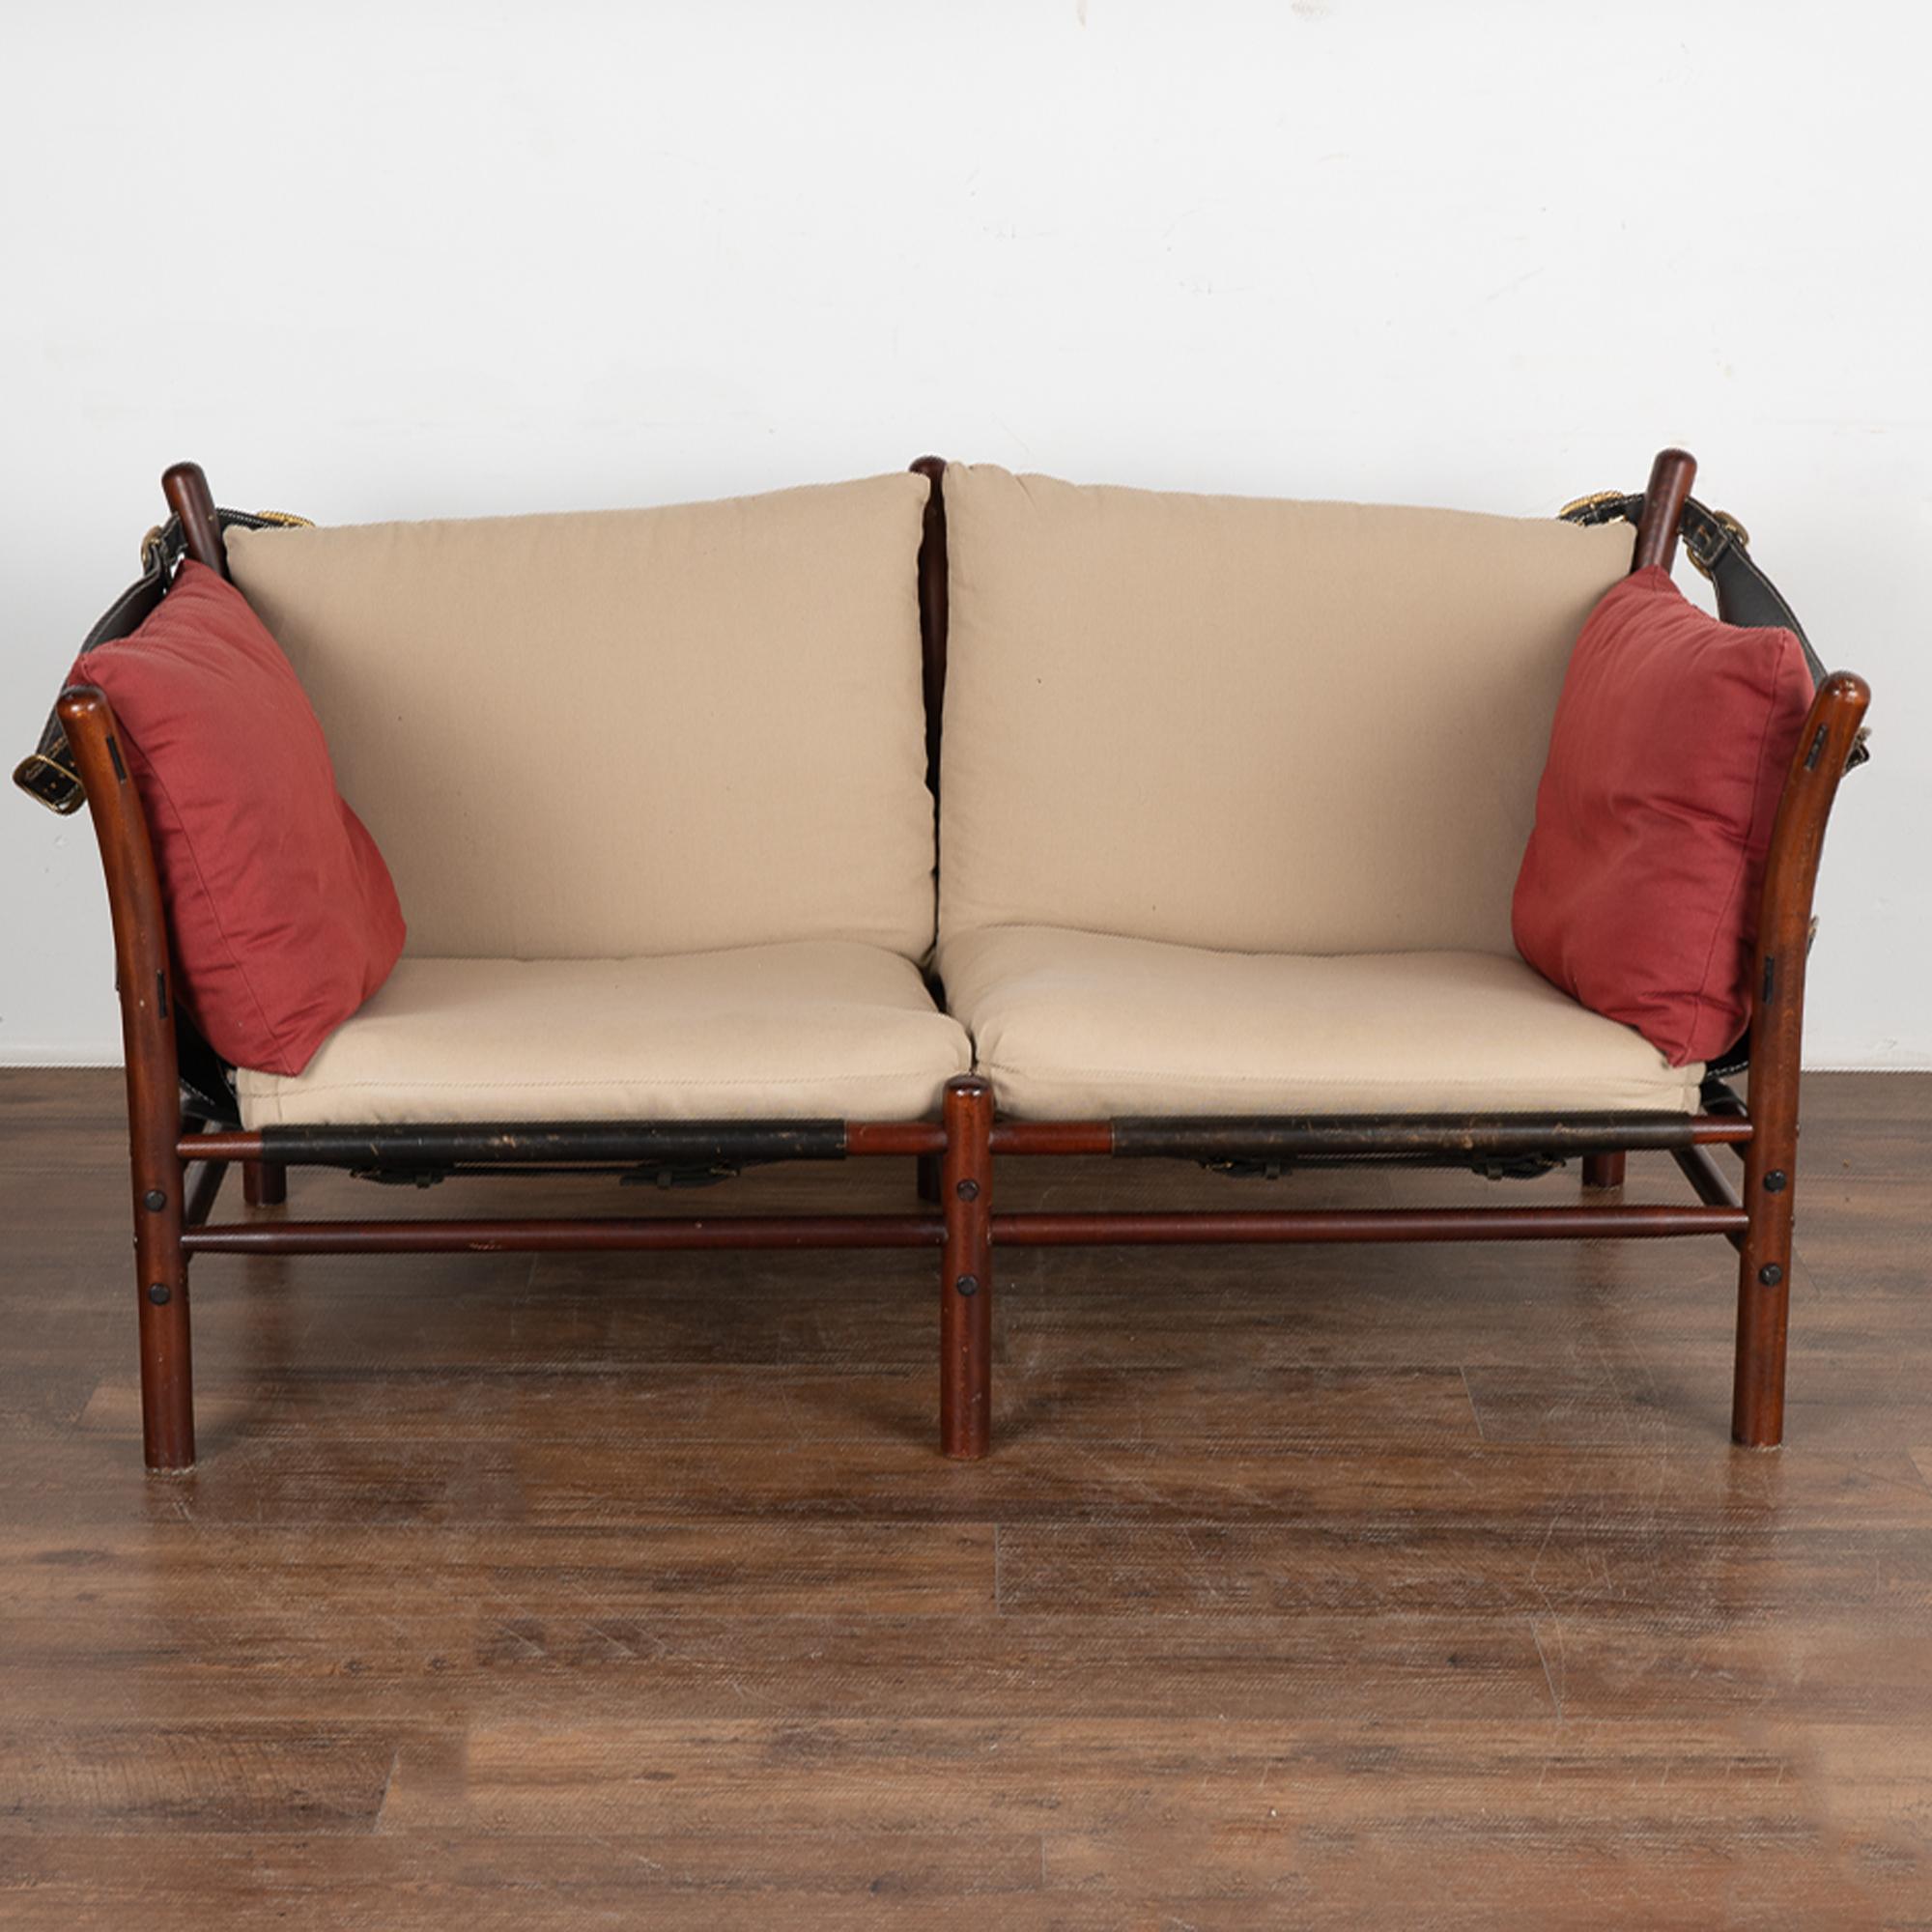 Swedish Mid-Century Modern Two-Person Illona Sofa by Arne Norell, Circa 1960